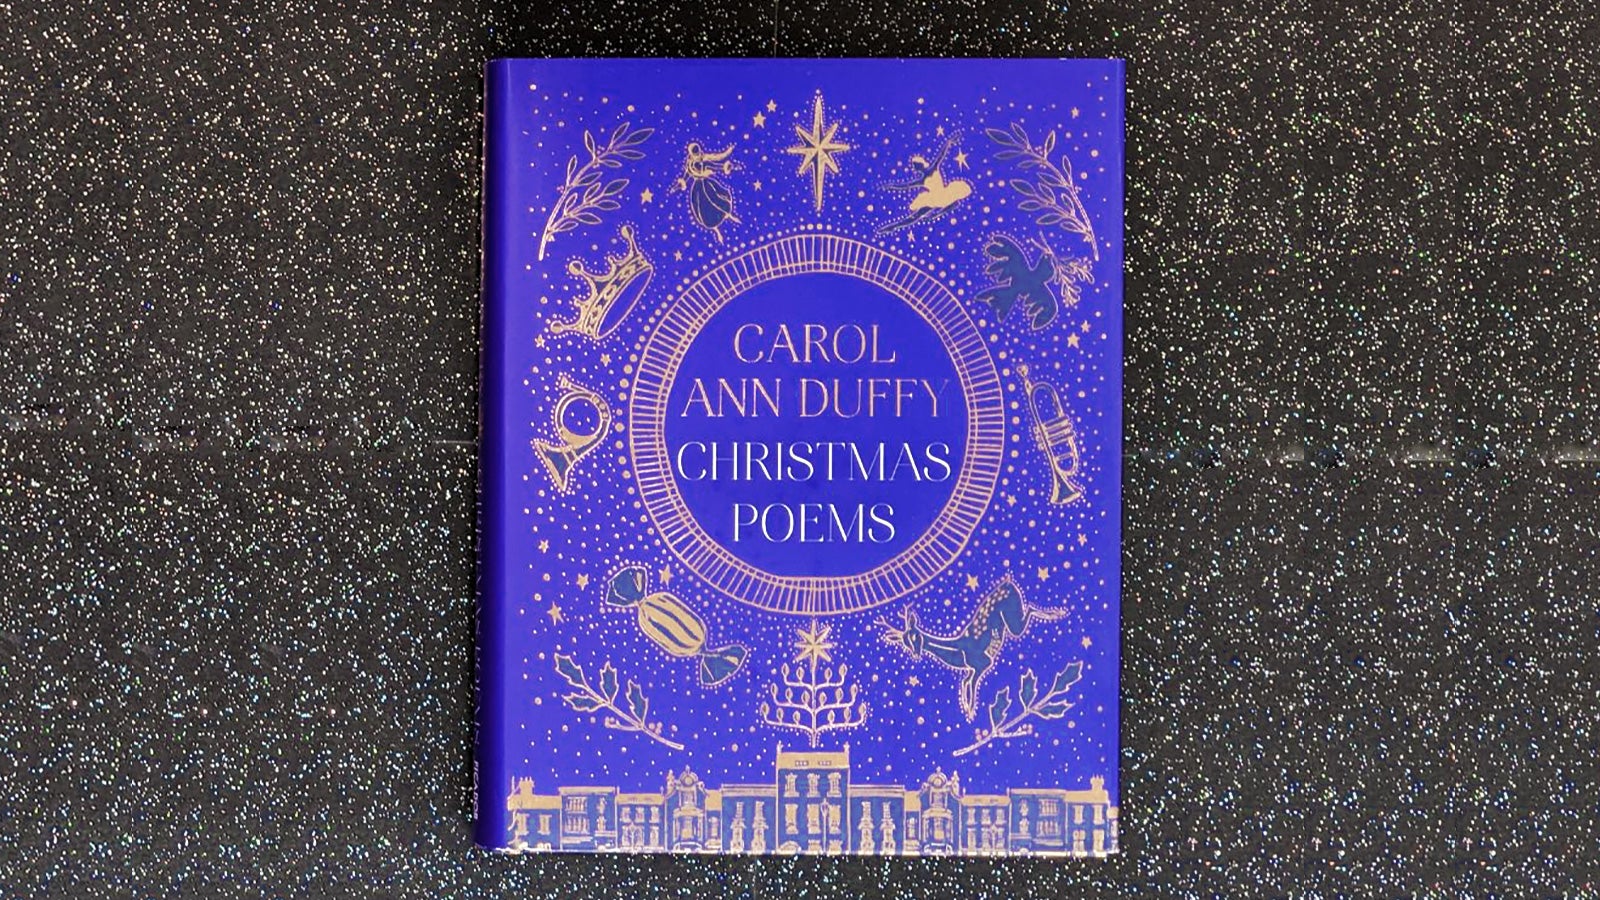 A copy of Christmas Poems by Carol Ann Duffy sits on a starry background.